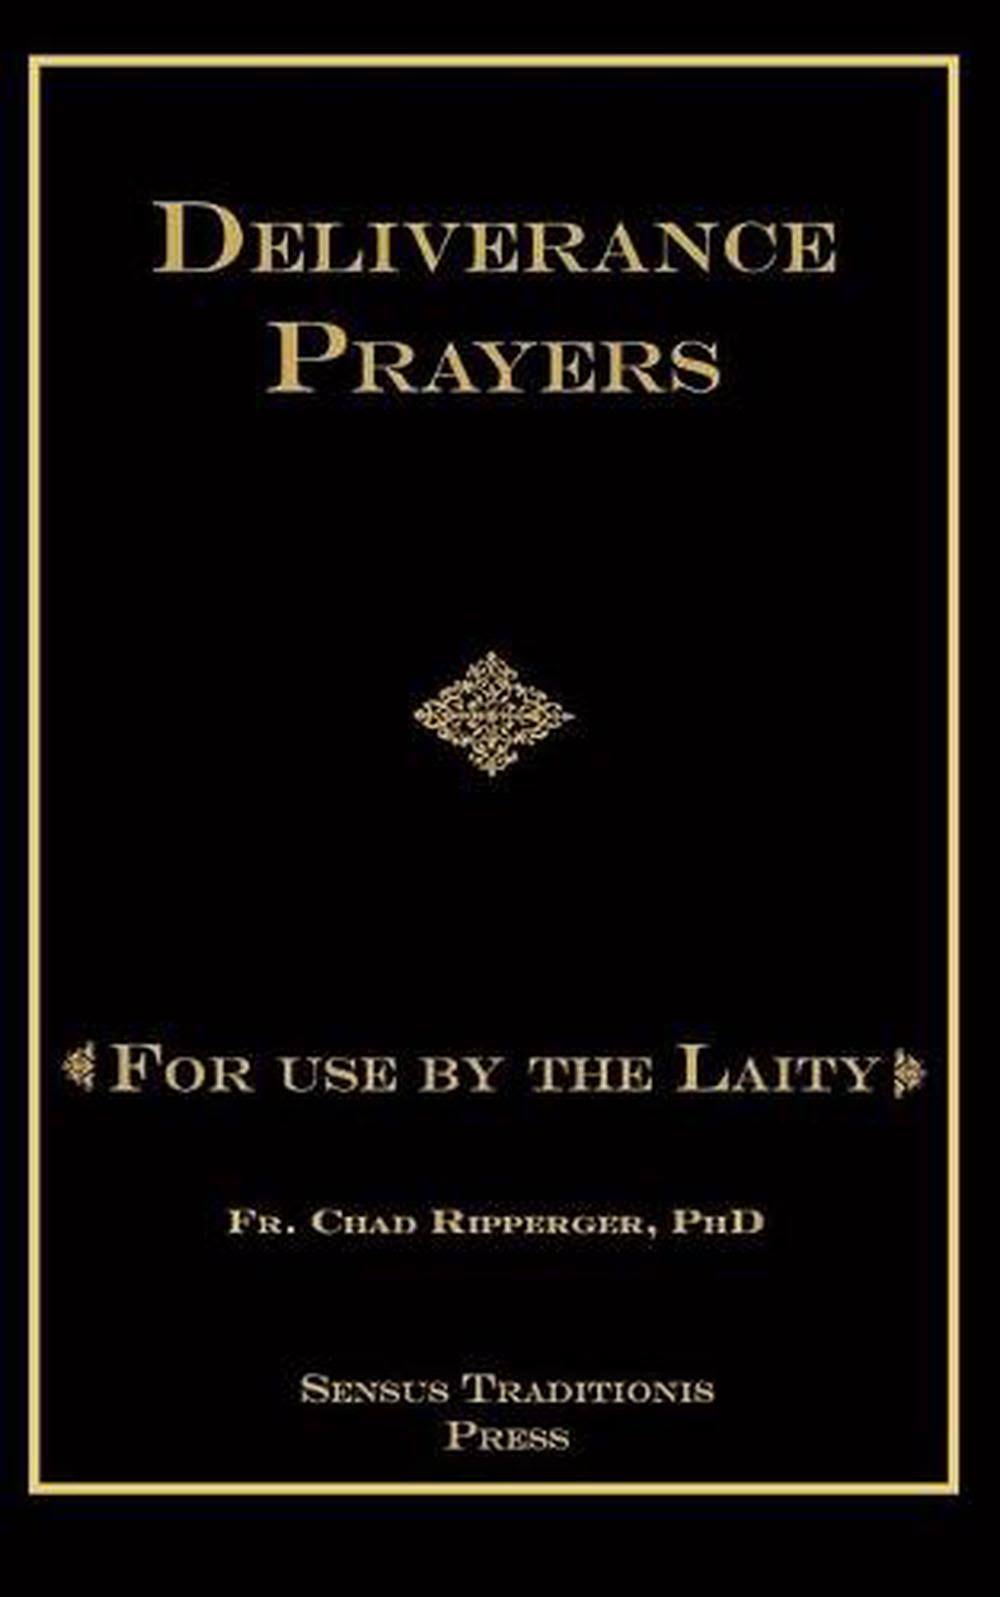 Deliverance Prayers: For Use by the Laity [Book]